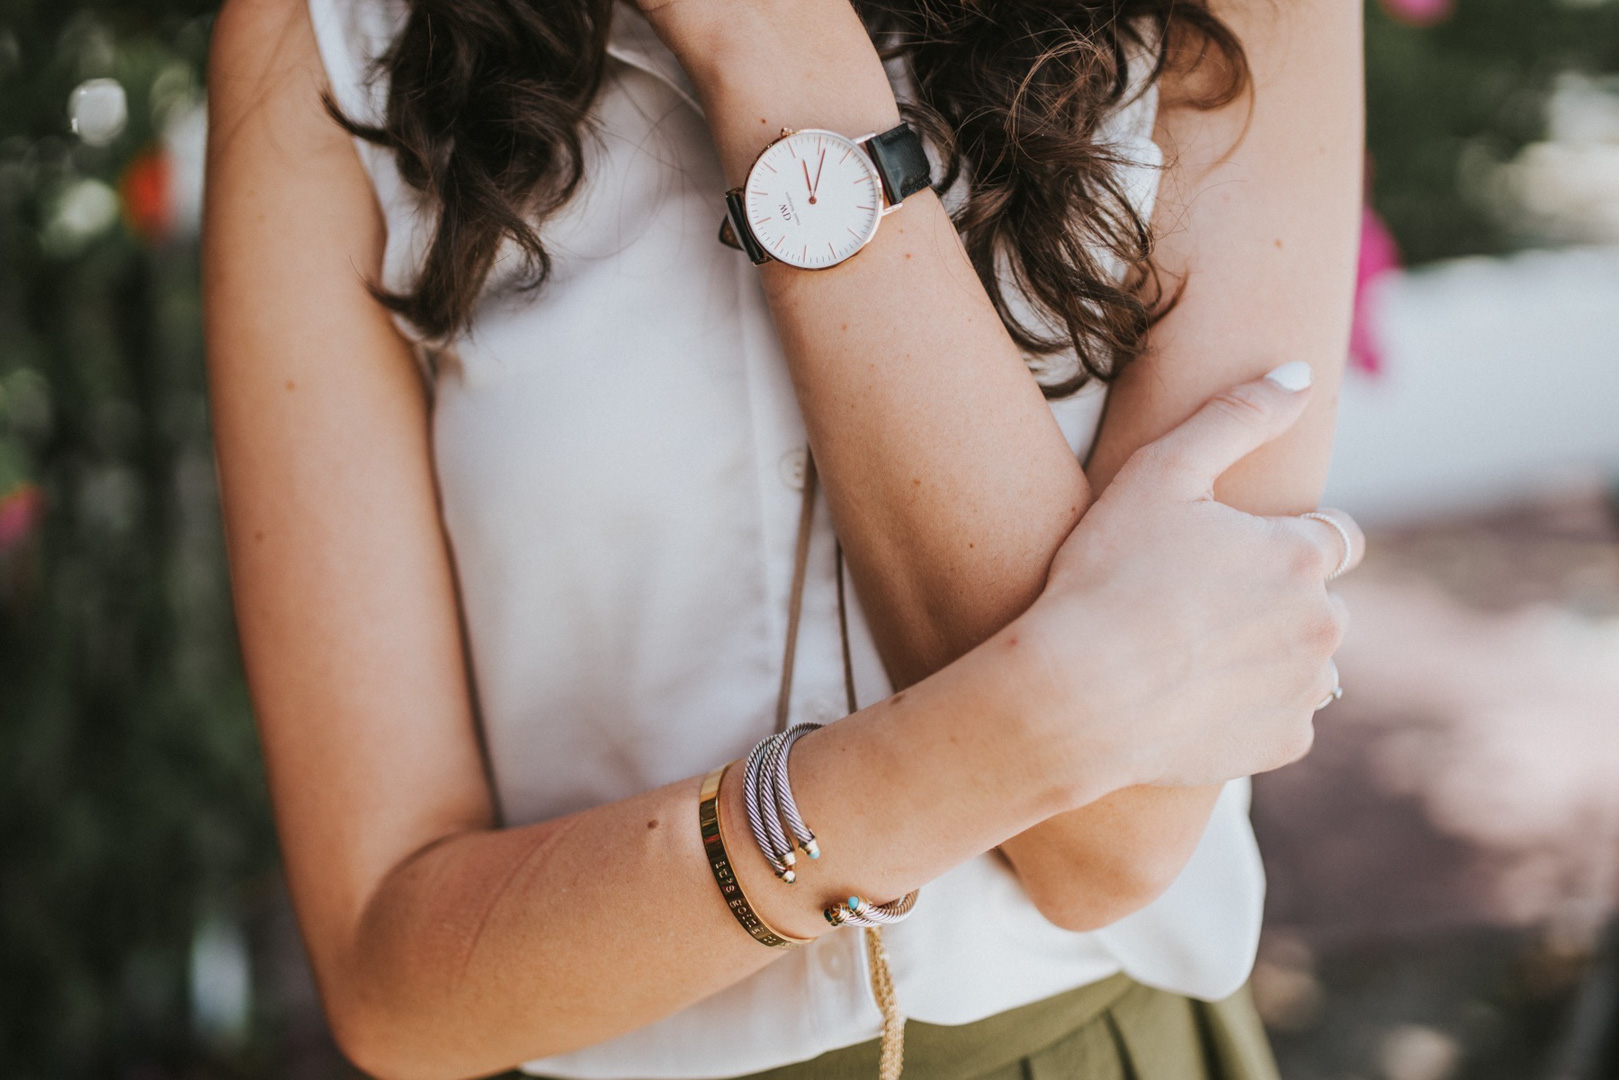 Jackie wearing a Daniel Wellington watch and her jewelry details 